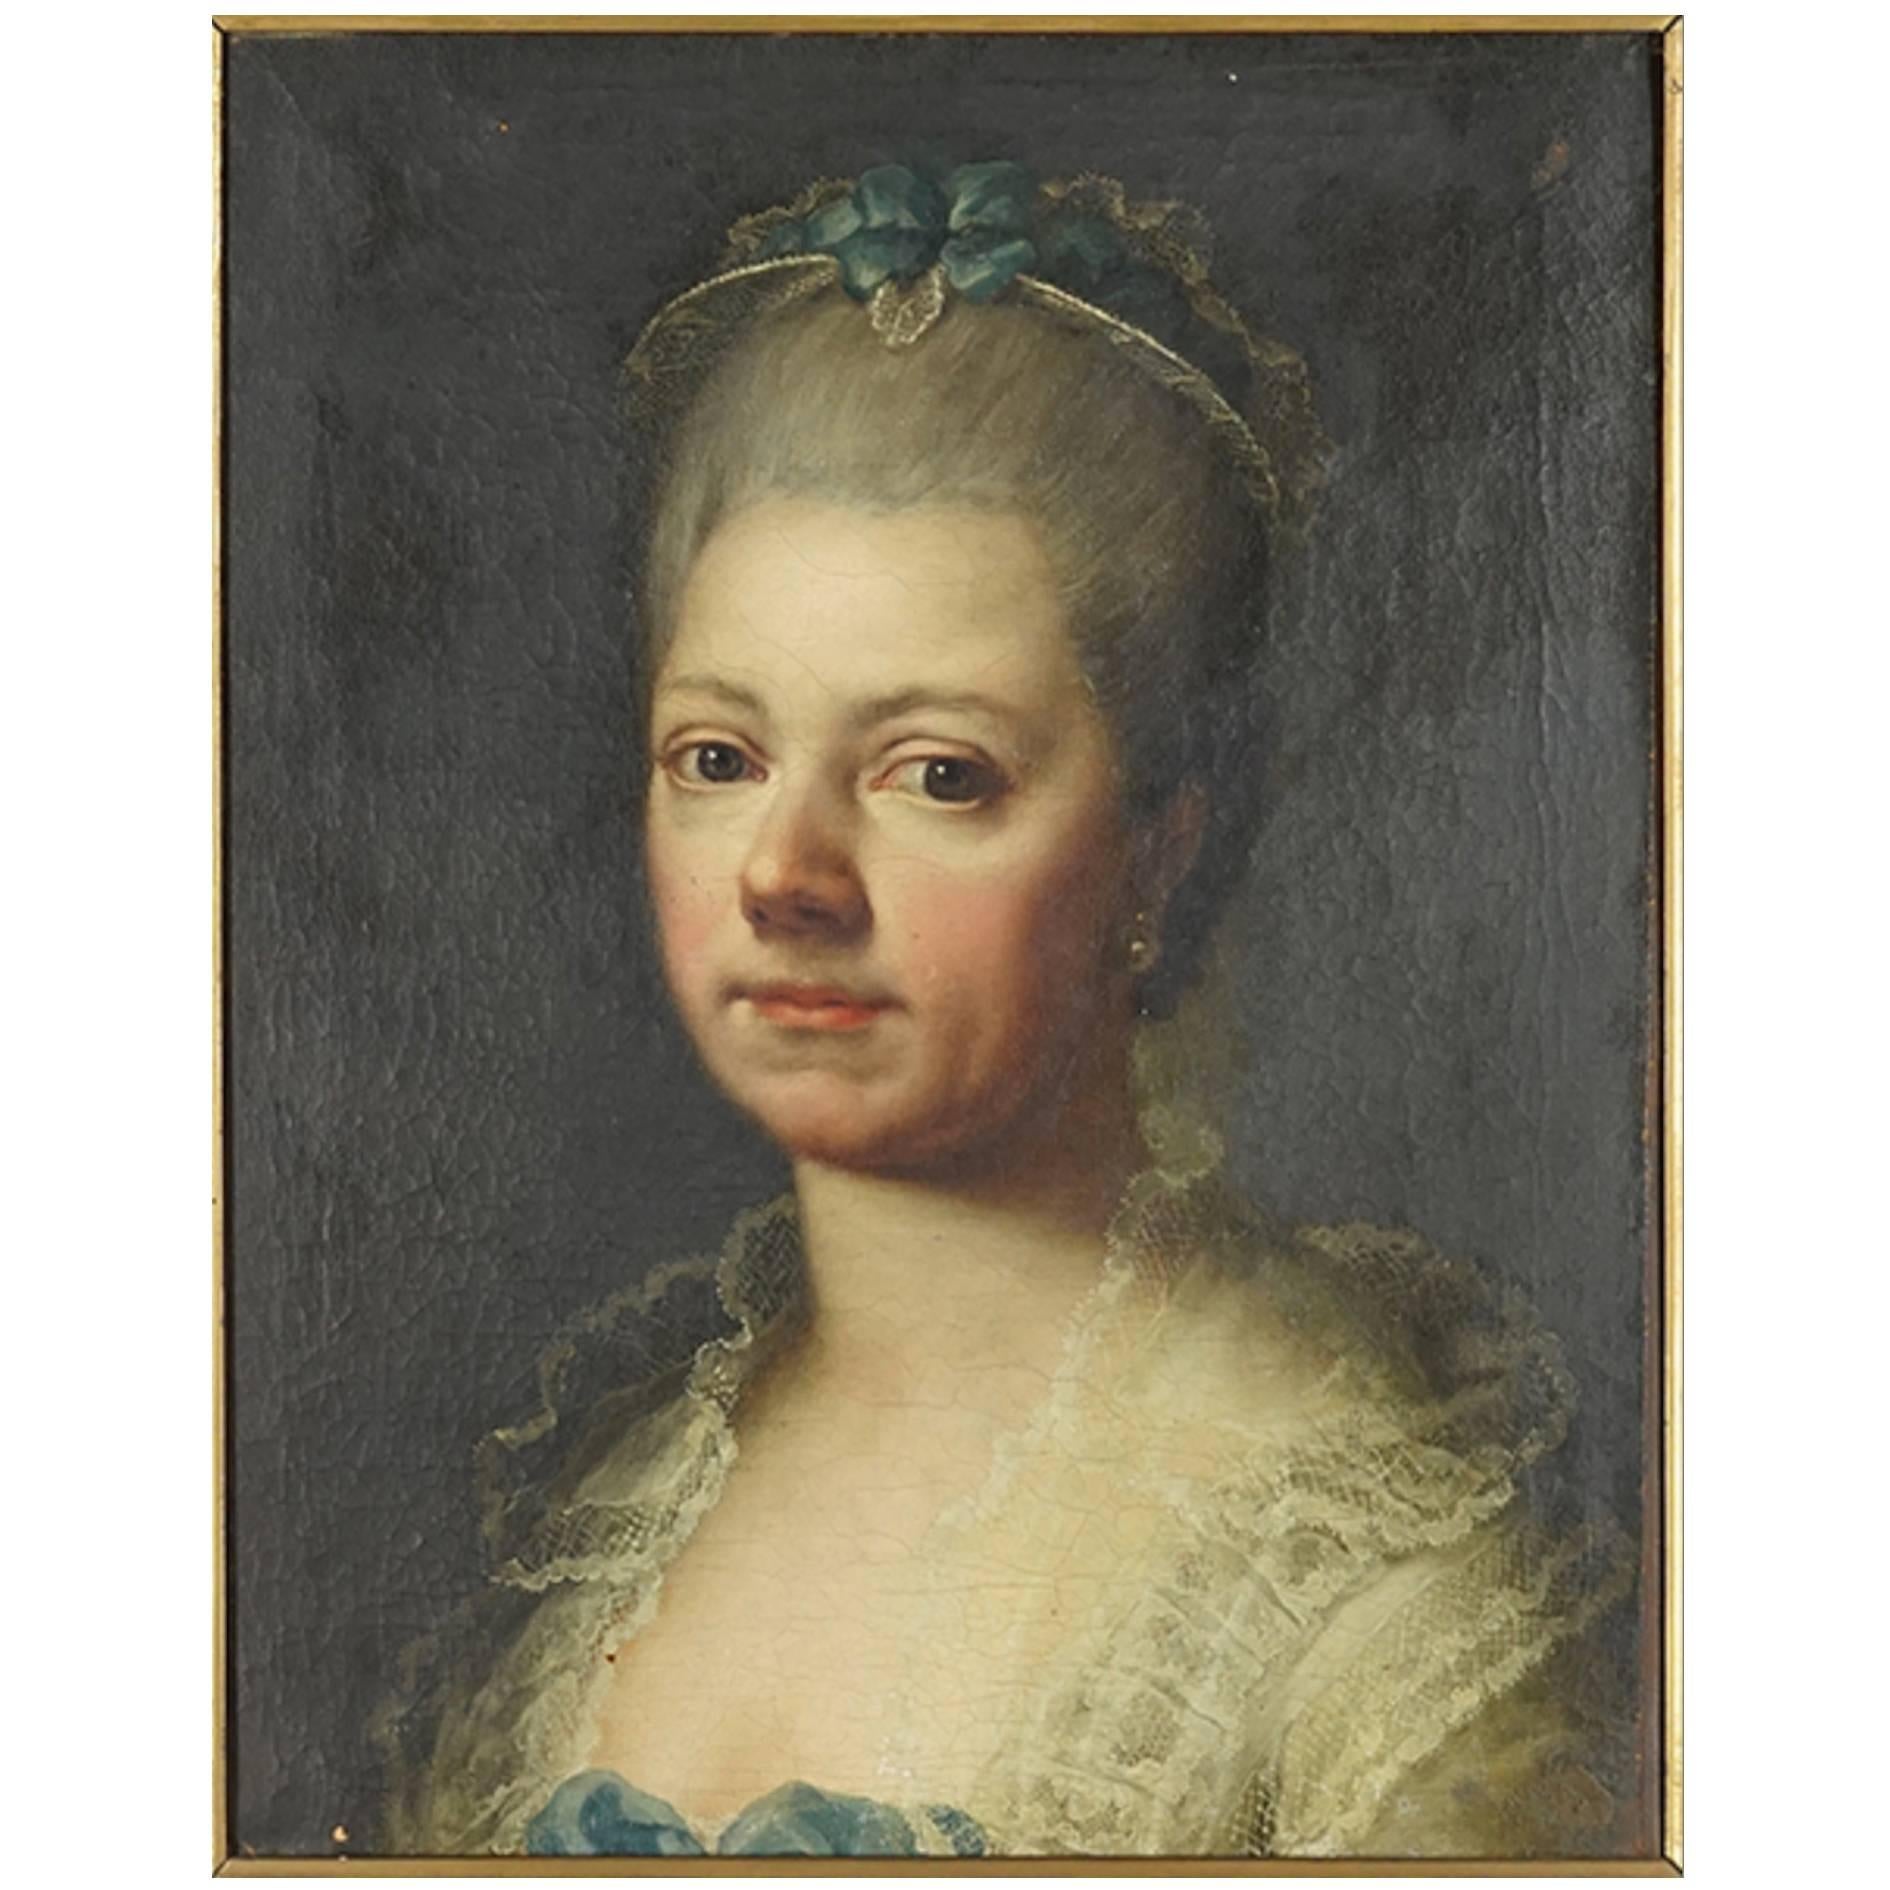 French School 18th Century Oil on Canvas in Gilt Frame, "Woman in Blue Dress"